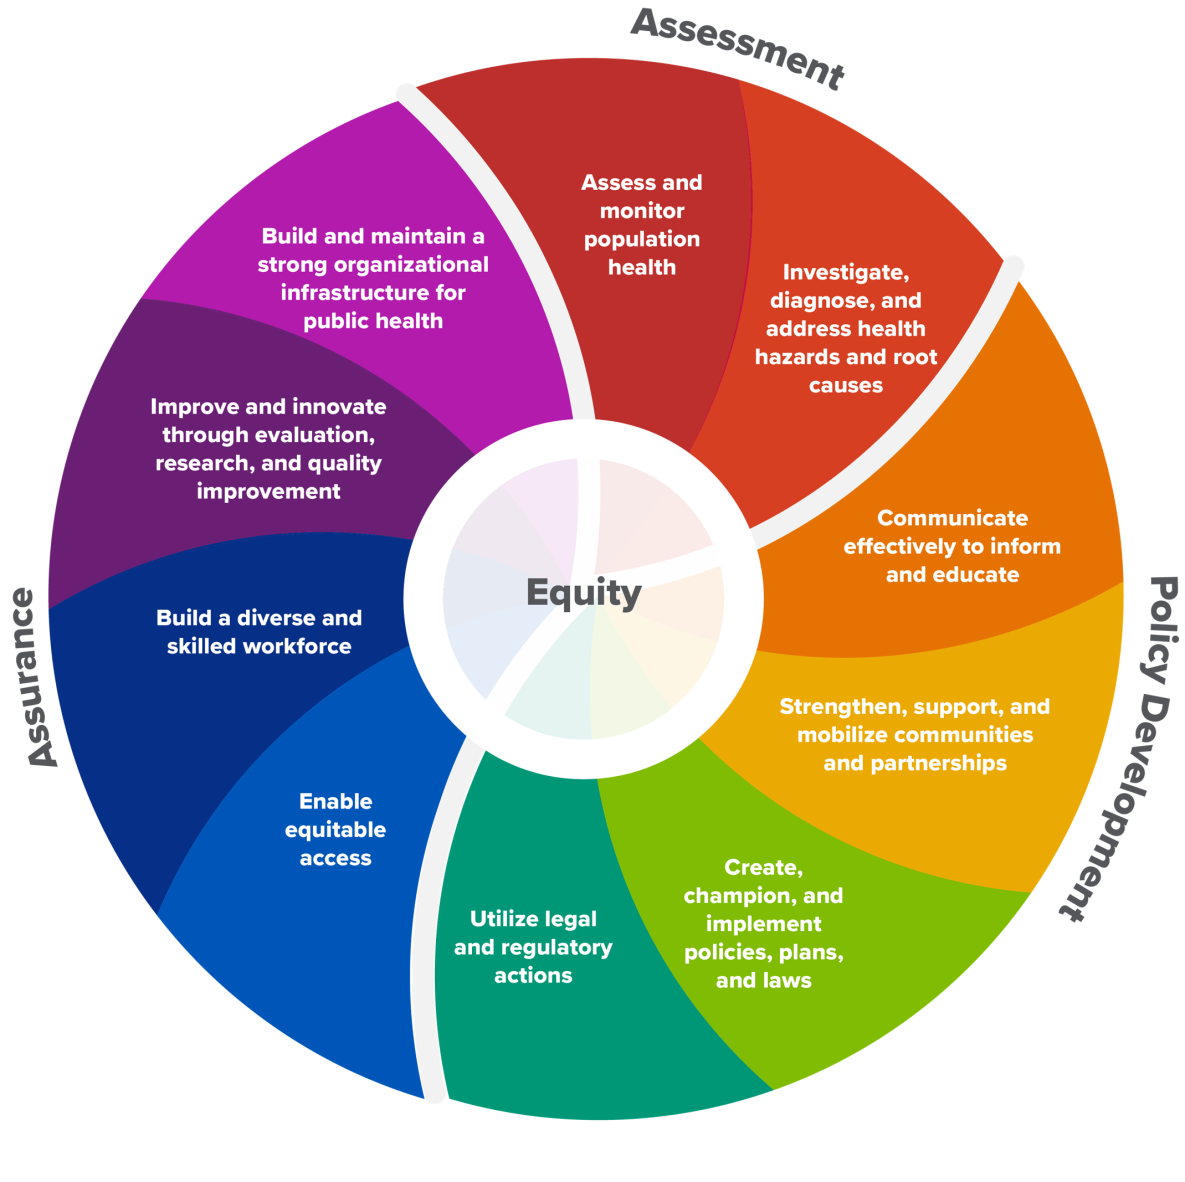 Ten Essential Public Health Services displayed in different dark colors as a wheel graphic with equity at the center.